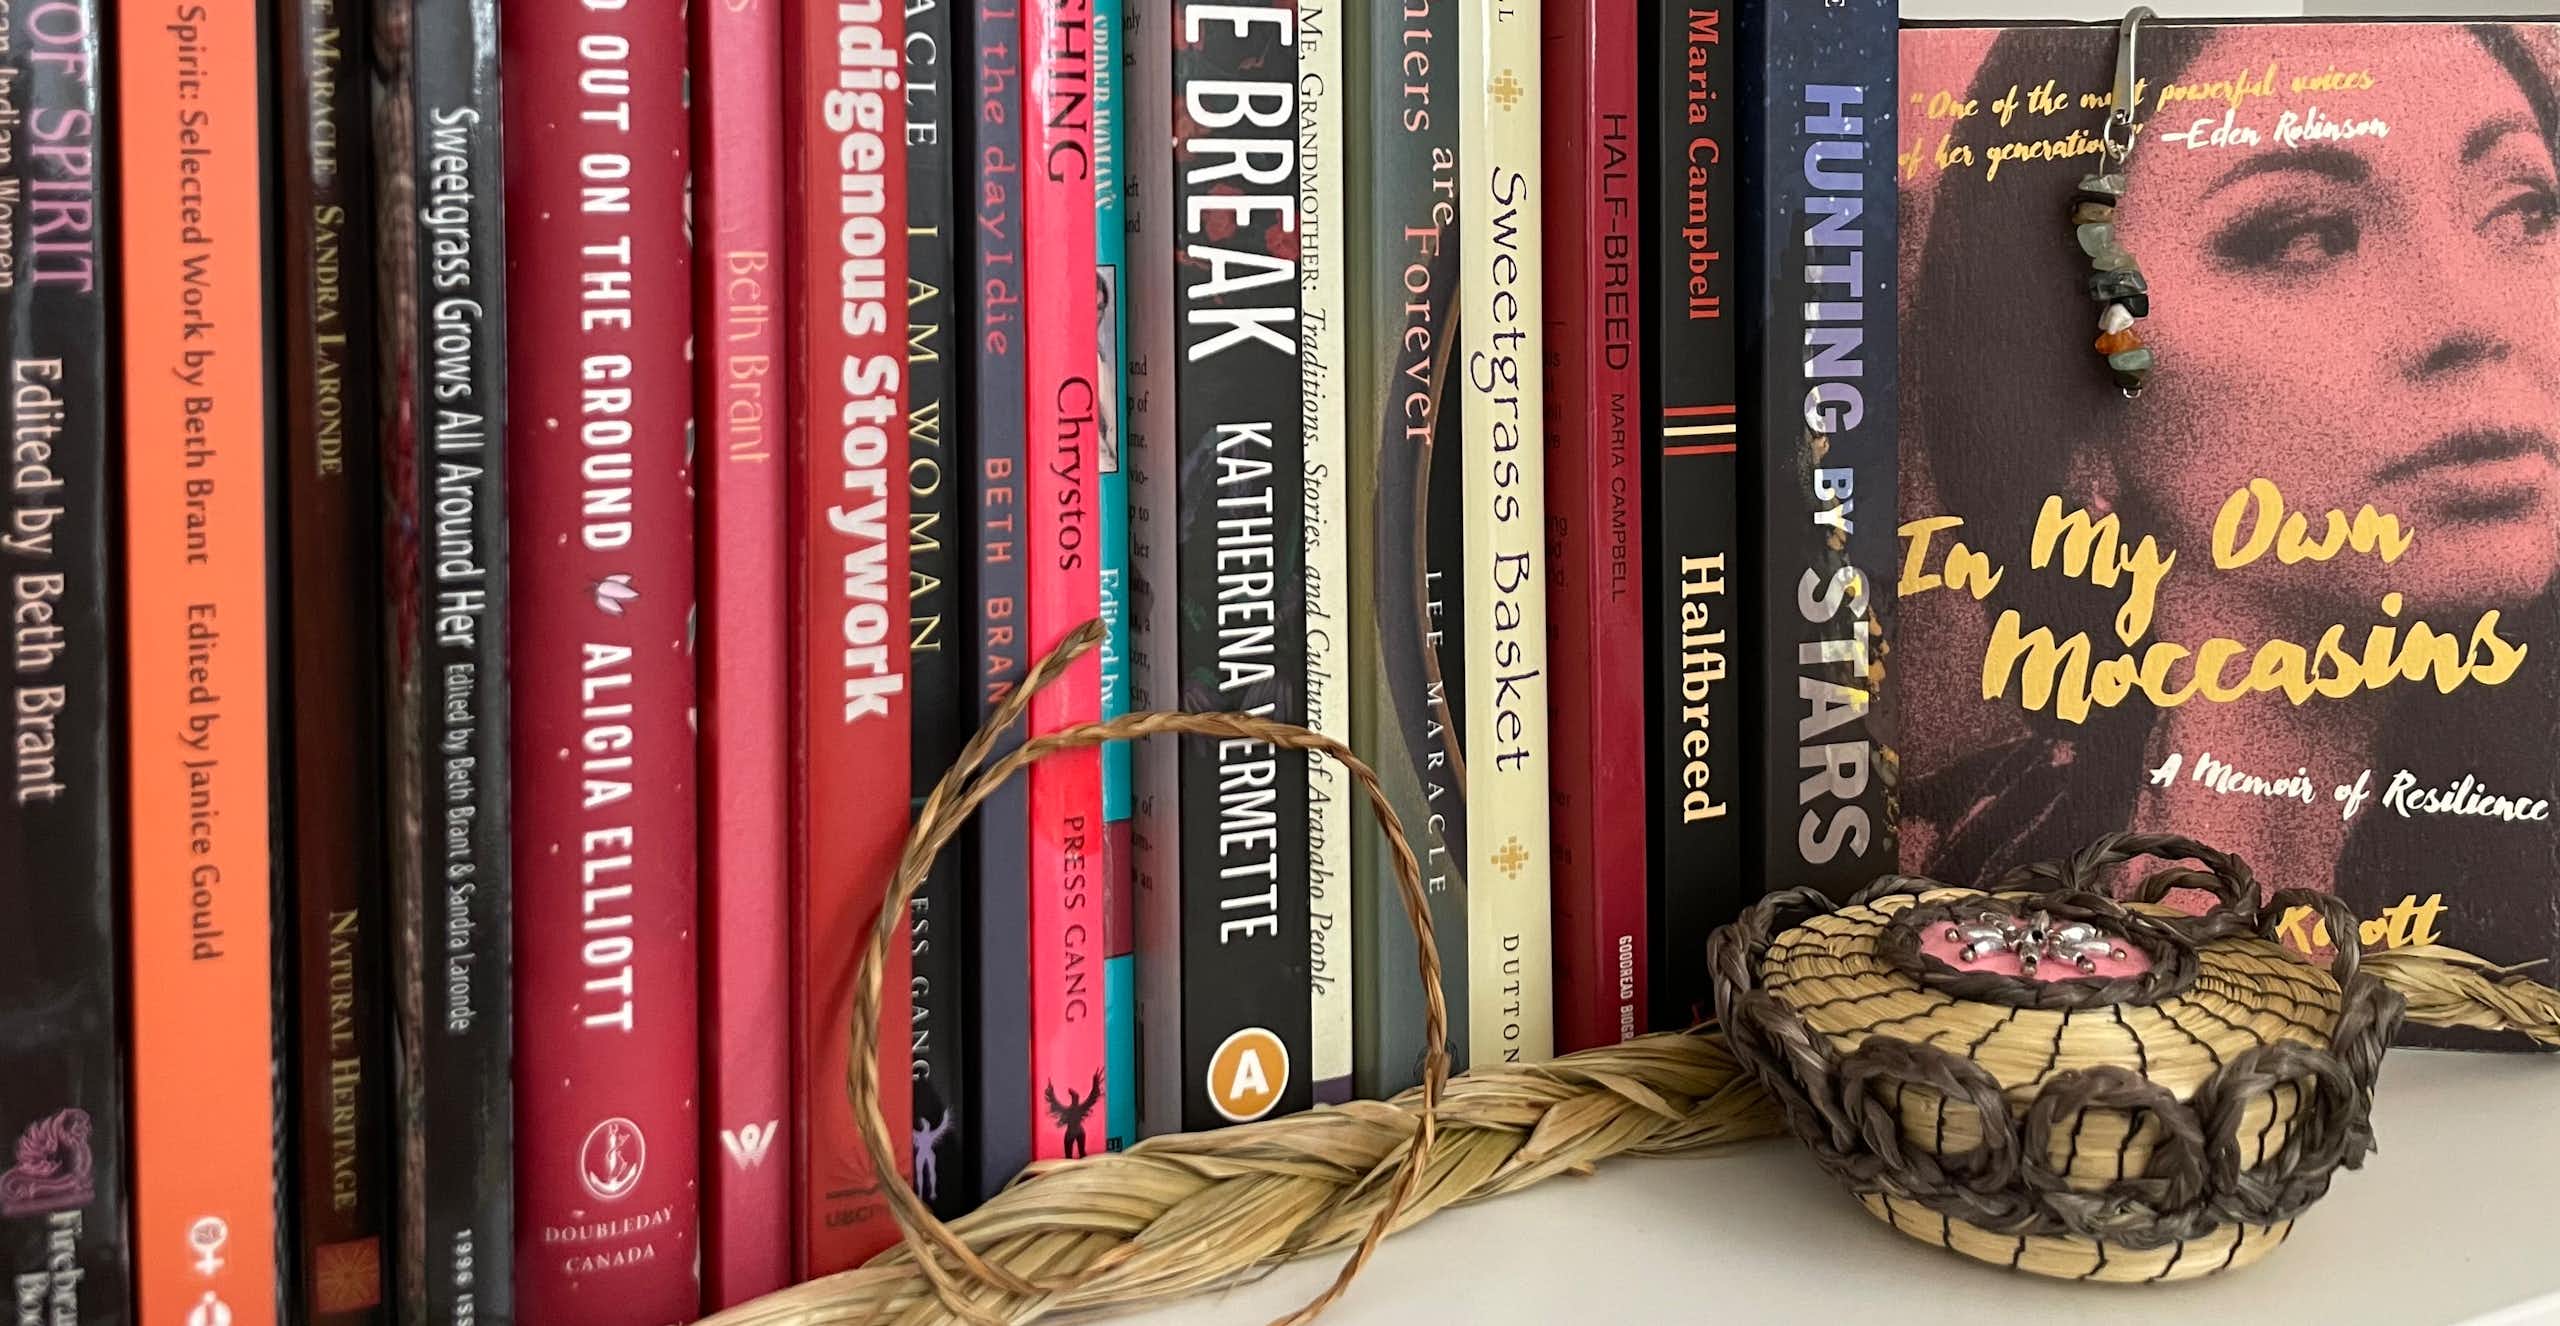 A row of books seen with a braid of sweetgrass in front.